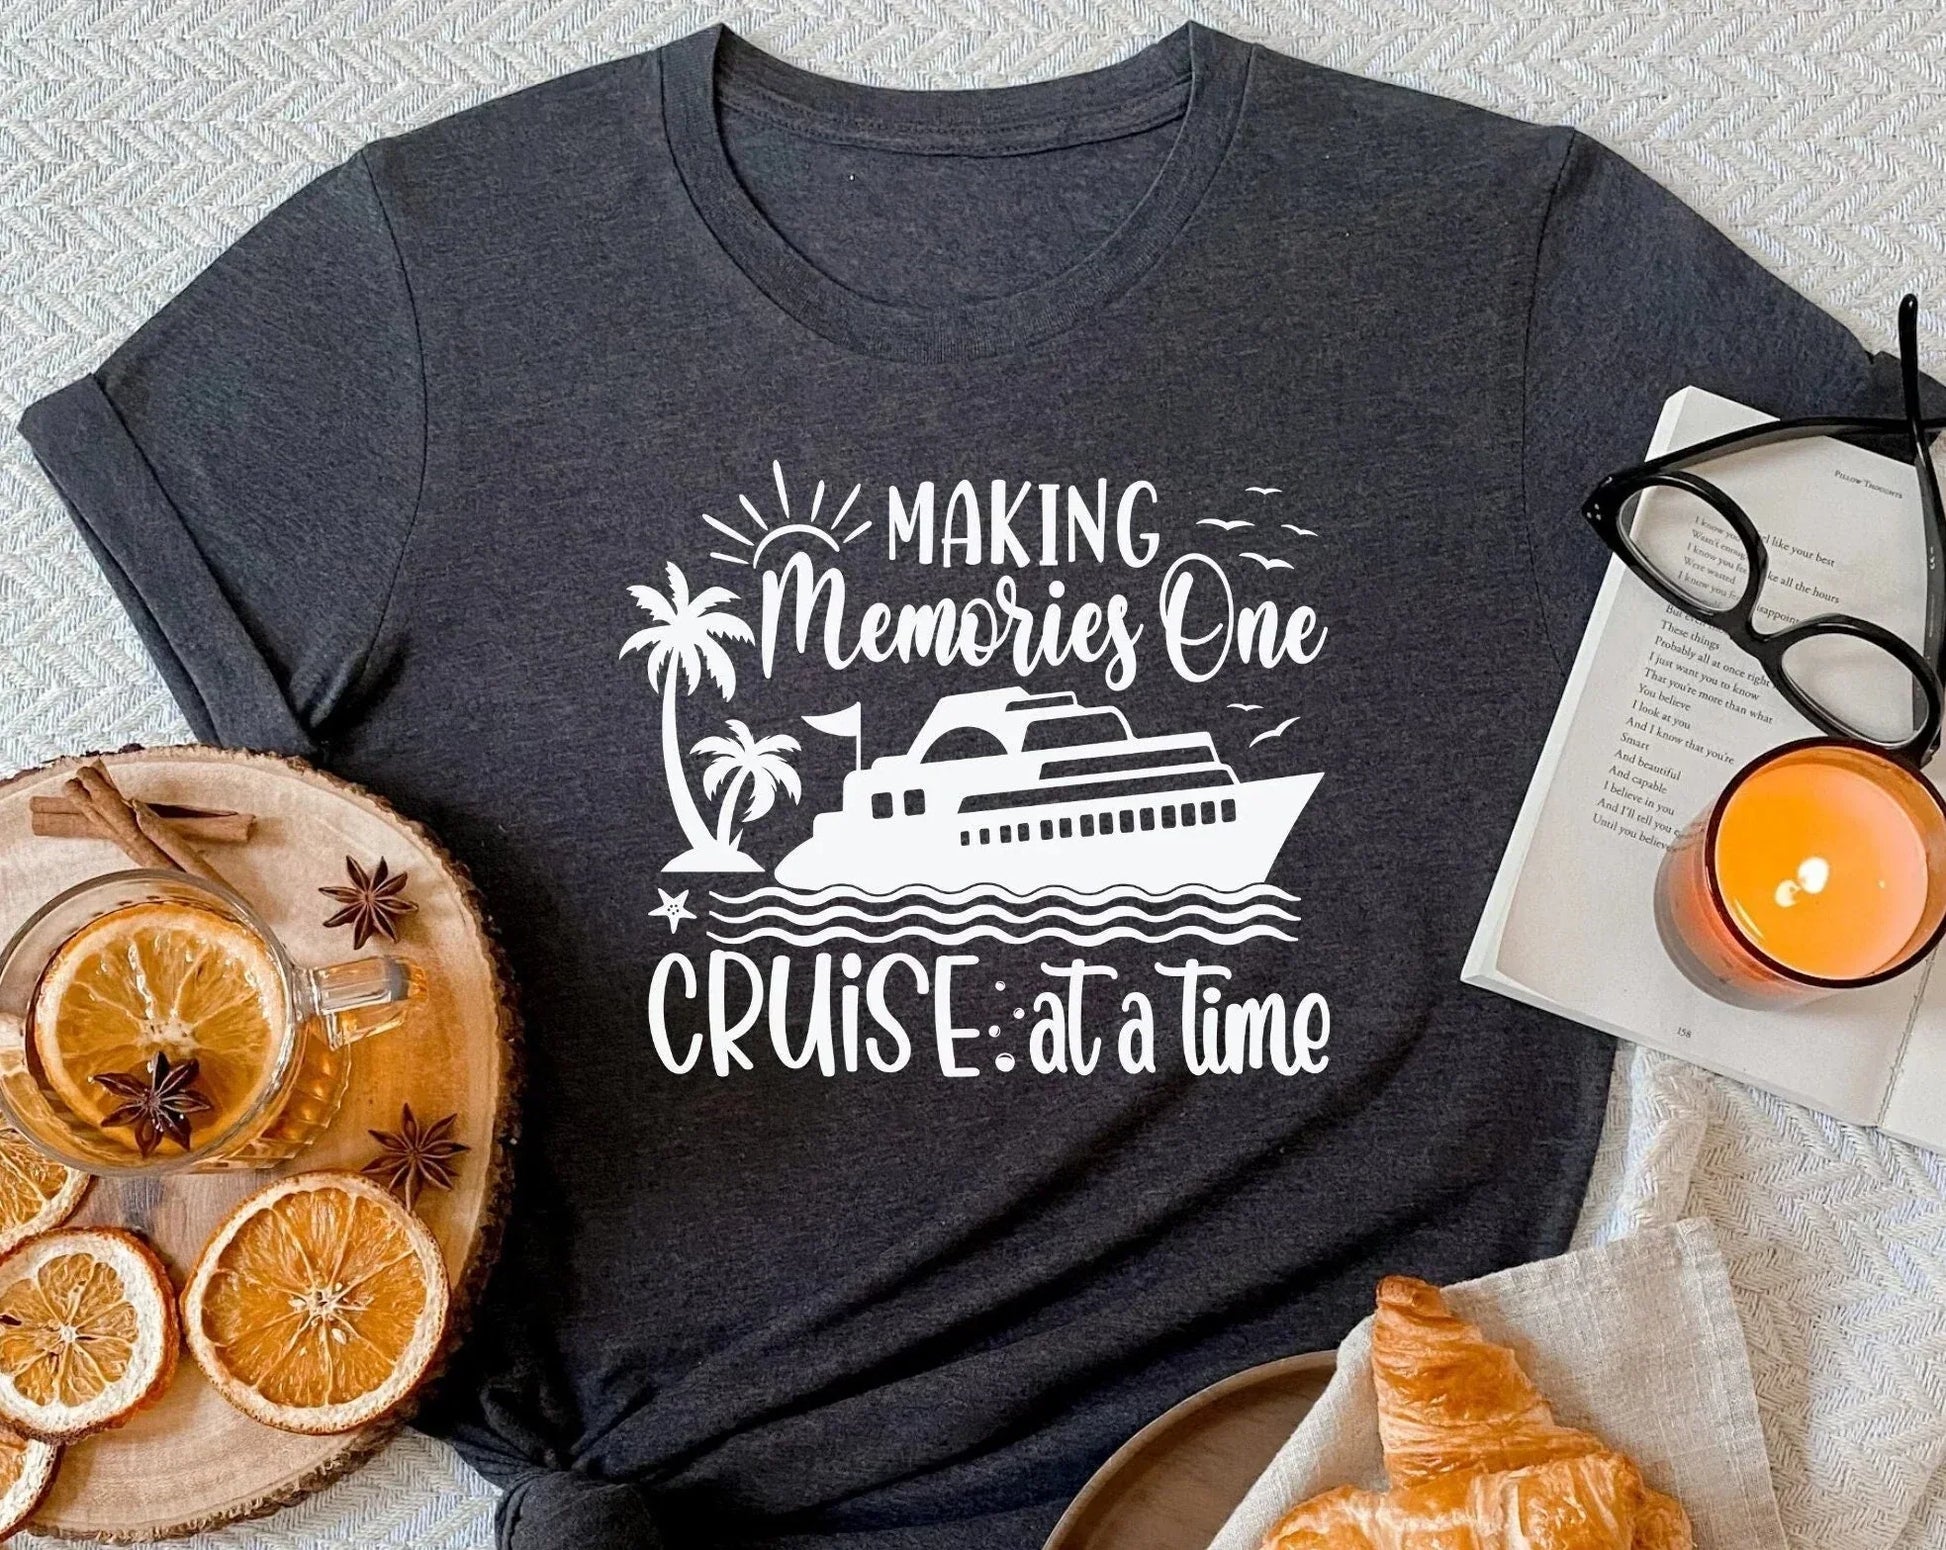 Making Memories One Cruise at a Time, Matching Family Cruise Shirts